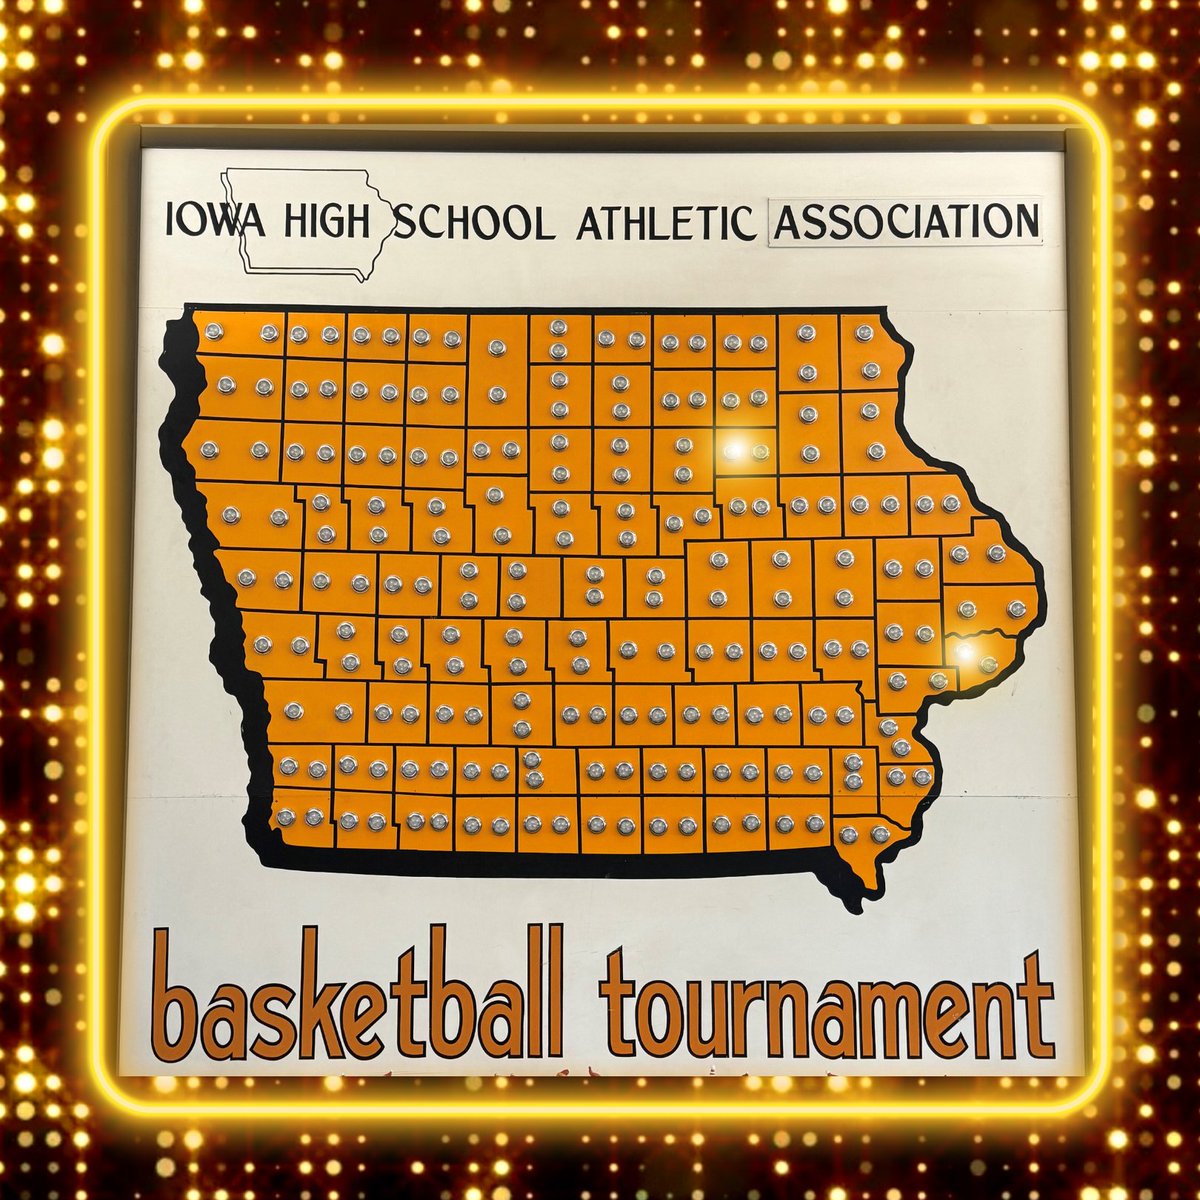 Up on deck is the Class3⃣🅰️ #iahsbkb final🏆: Assumption, Davenport (18-8) vs. Waverly-Shell Rock (22-3). The action starts in less than 15 minutes! 🏀iahsaa.org/basketball/sta…